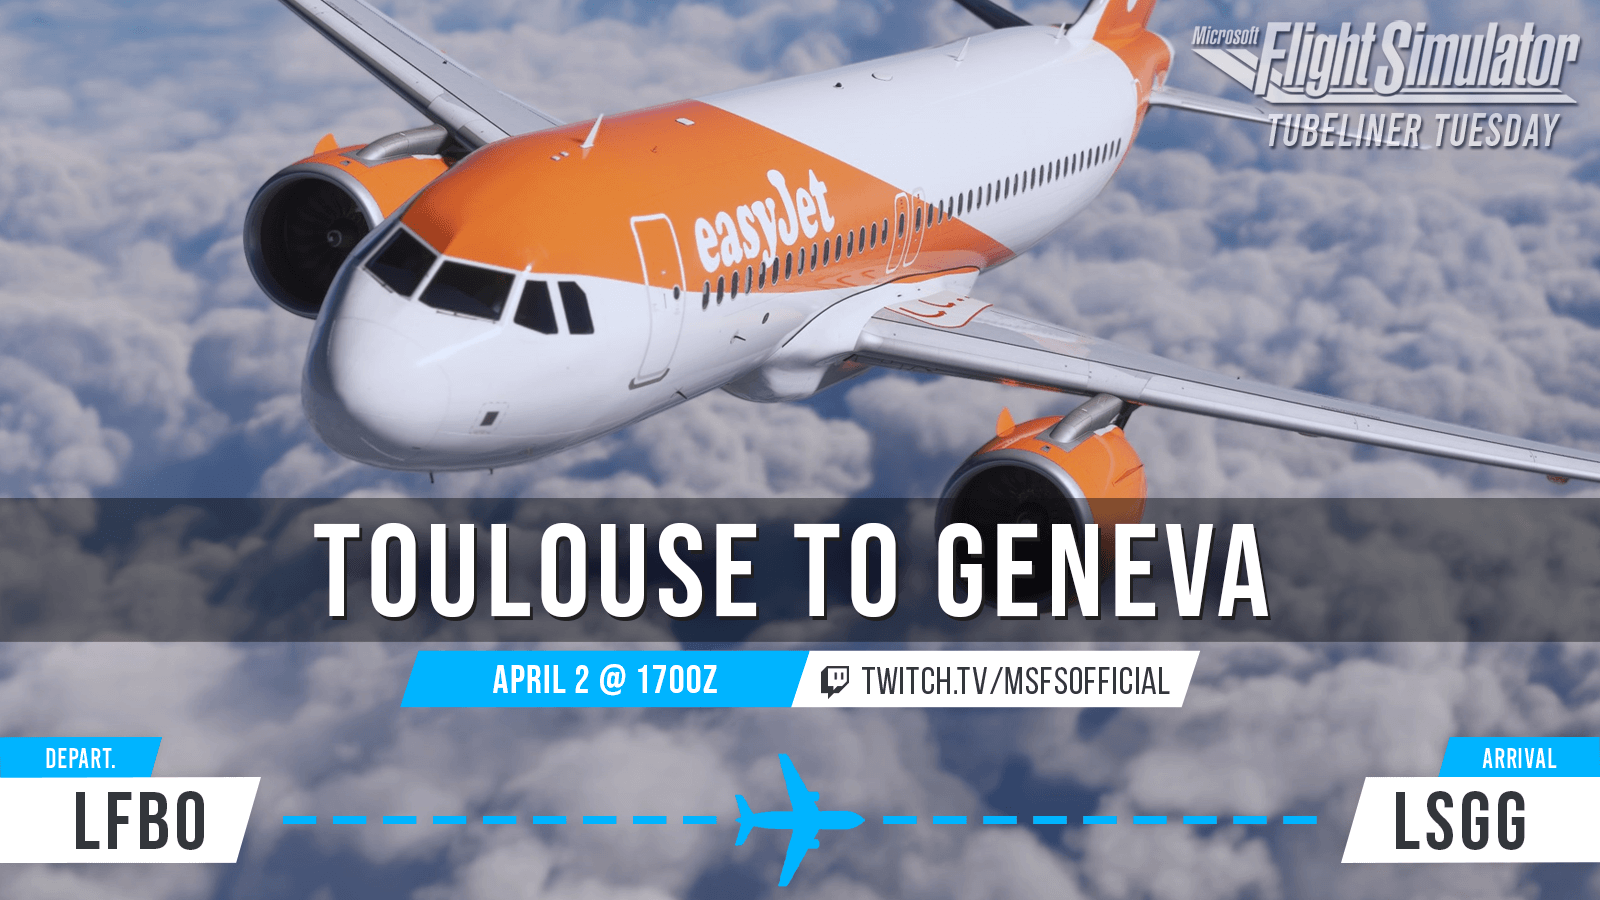 Tubeliner Tuesday - Toulouse to Geneva. April 2 at 1700 UTC. Twitch.tv/msfsofficial